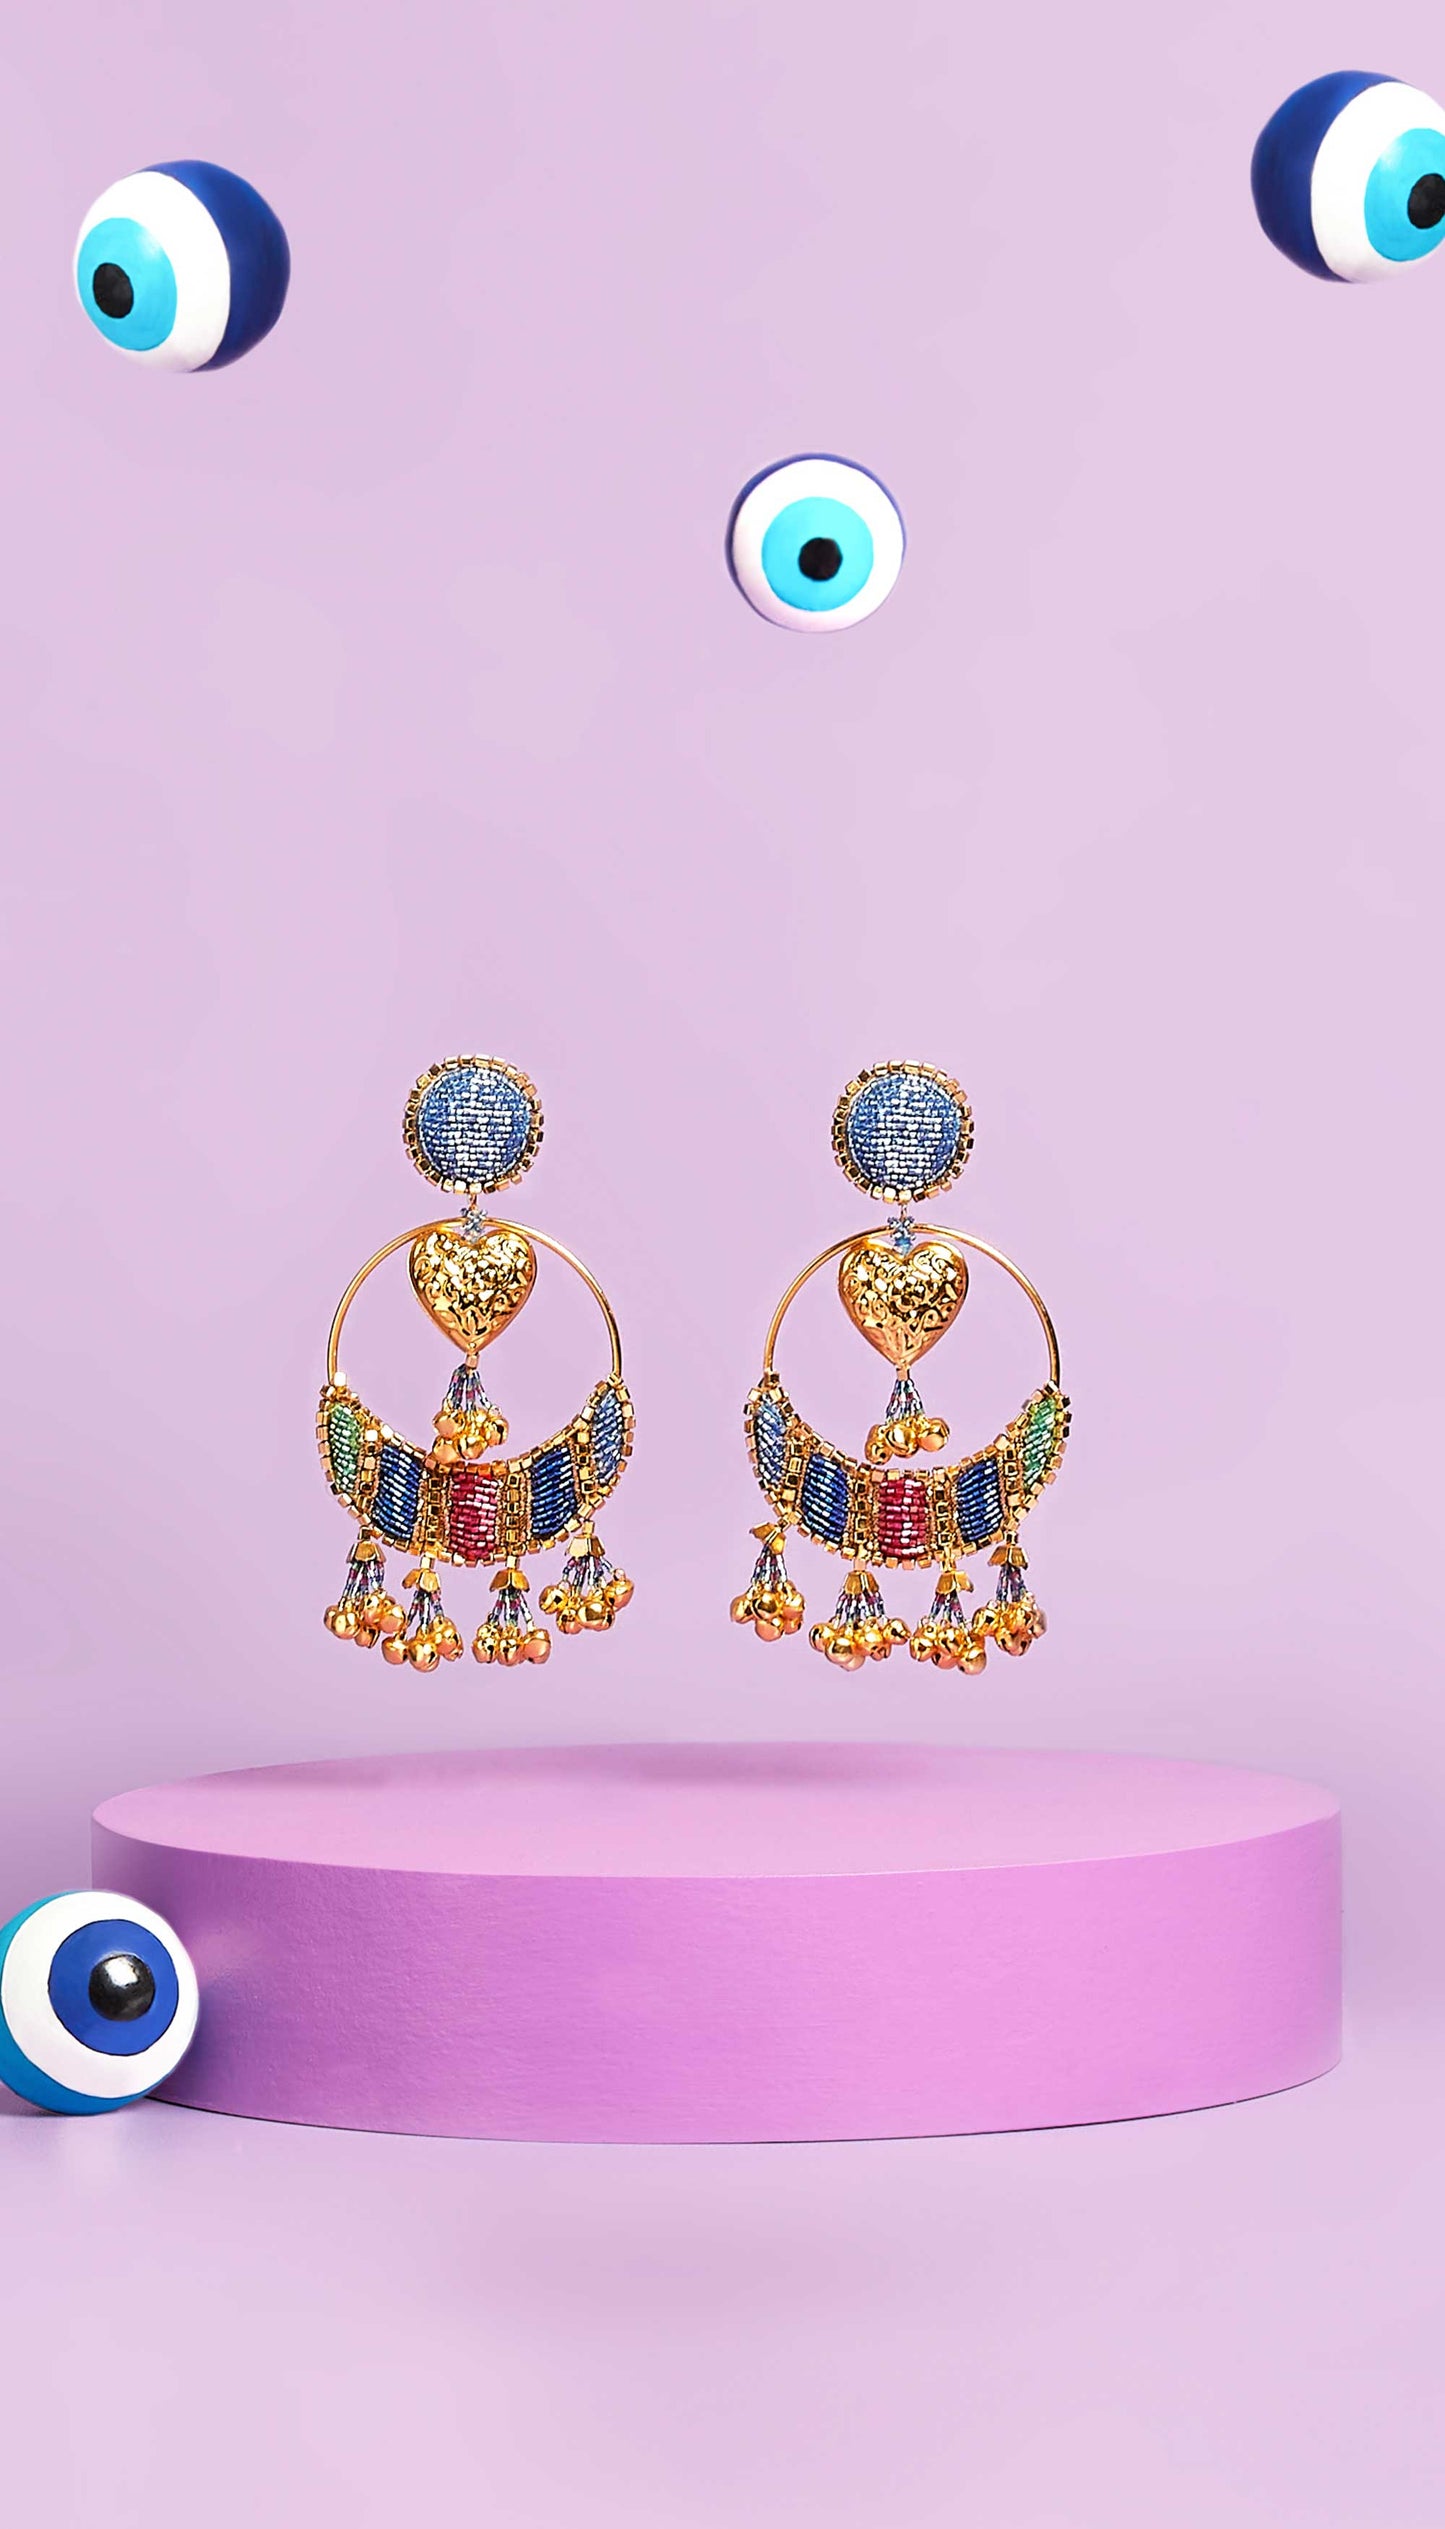 STARRY AFFAIR -  EMBROIDERED CHANDBALI EARRINGS